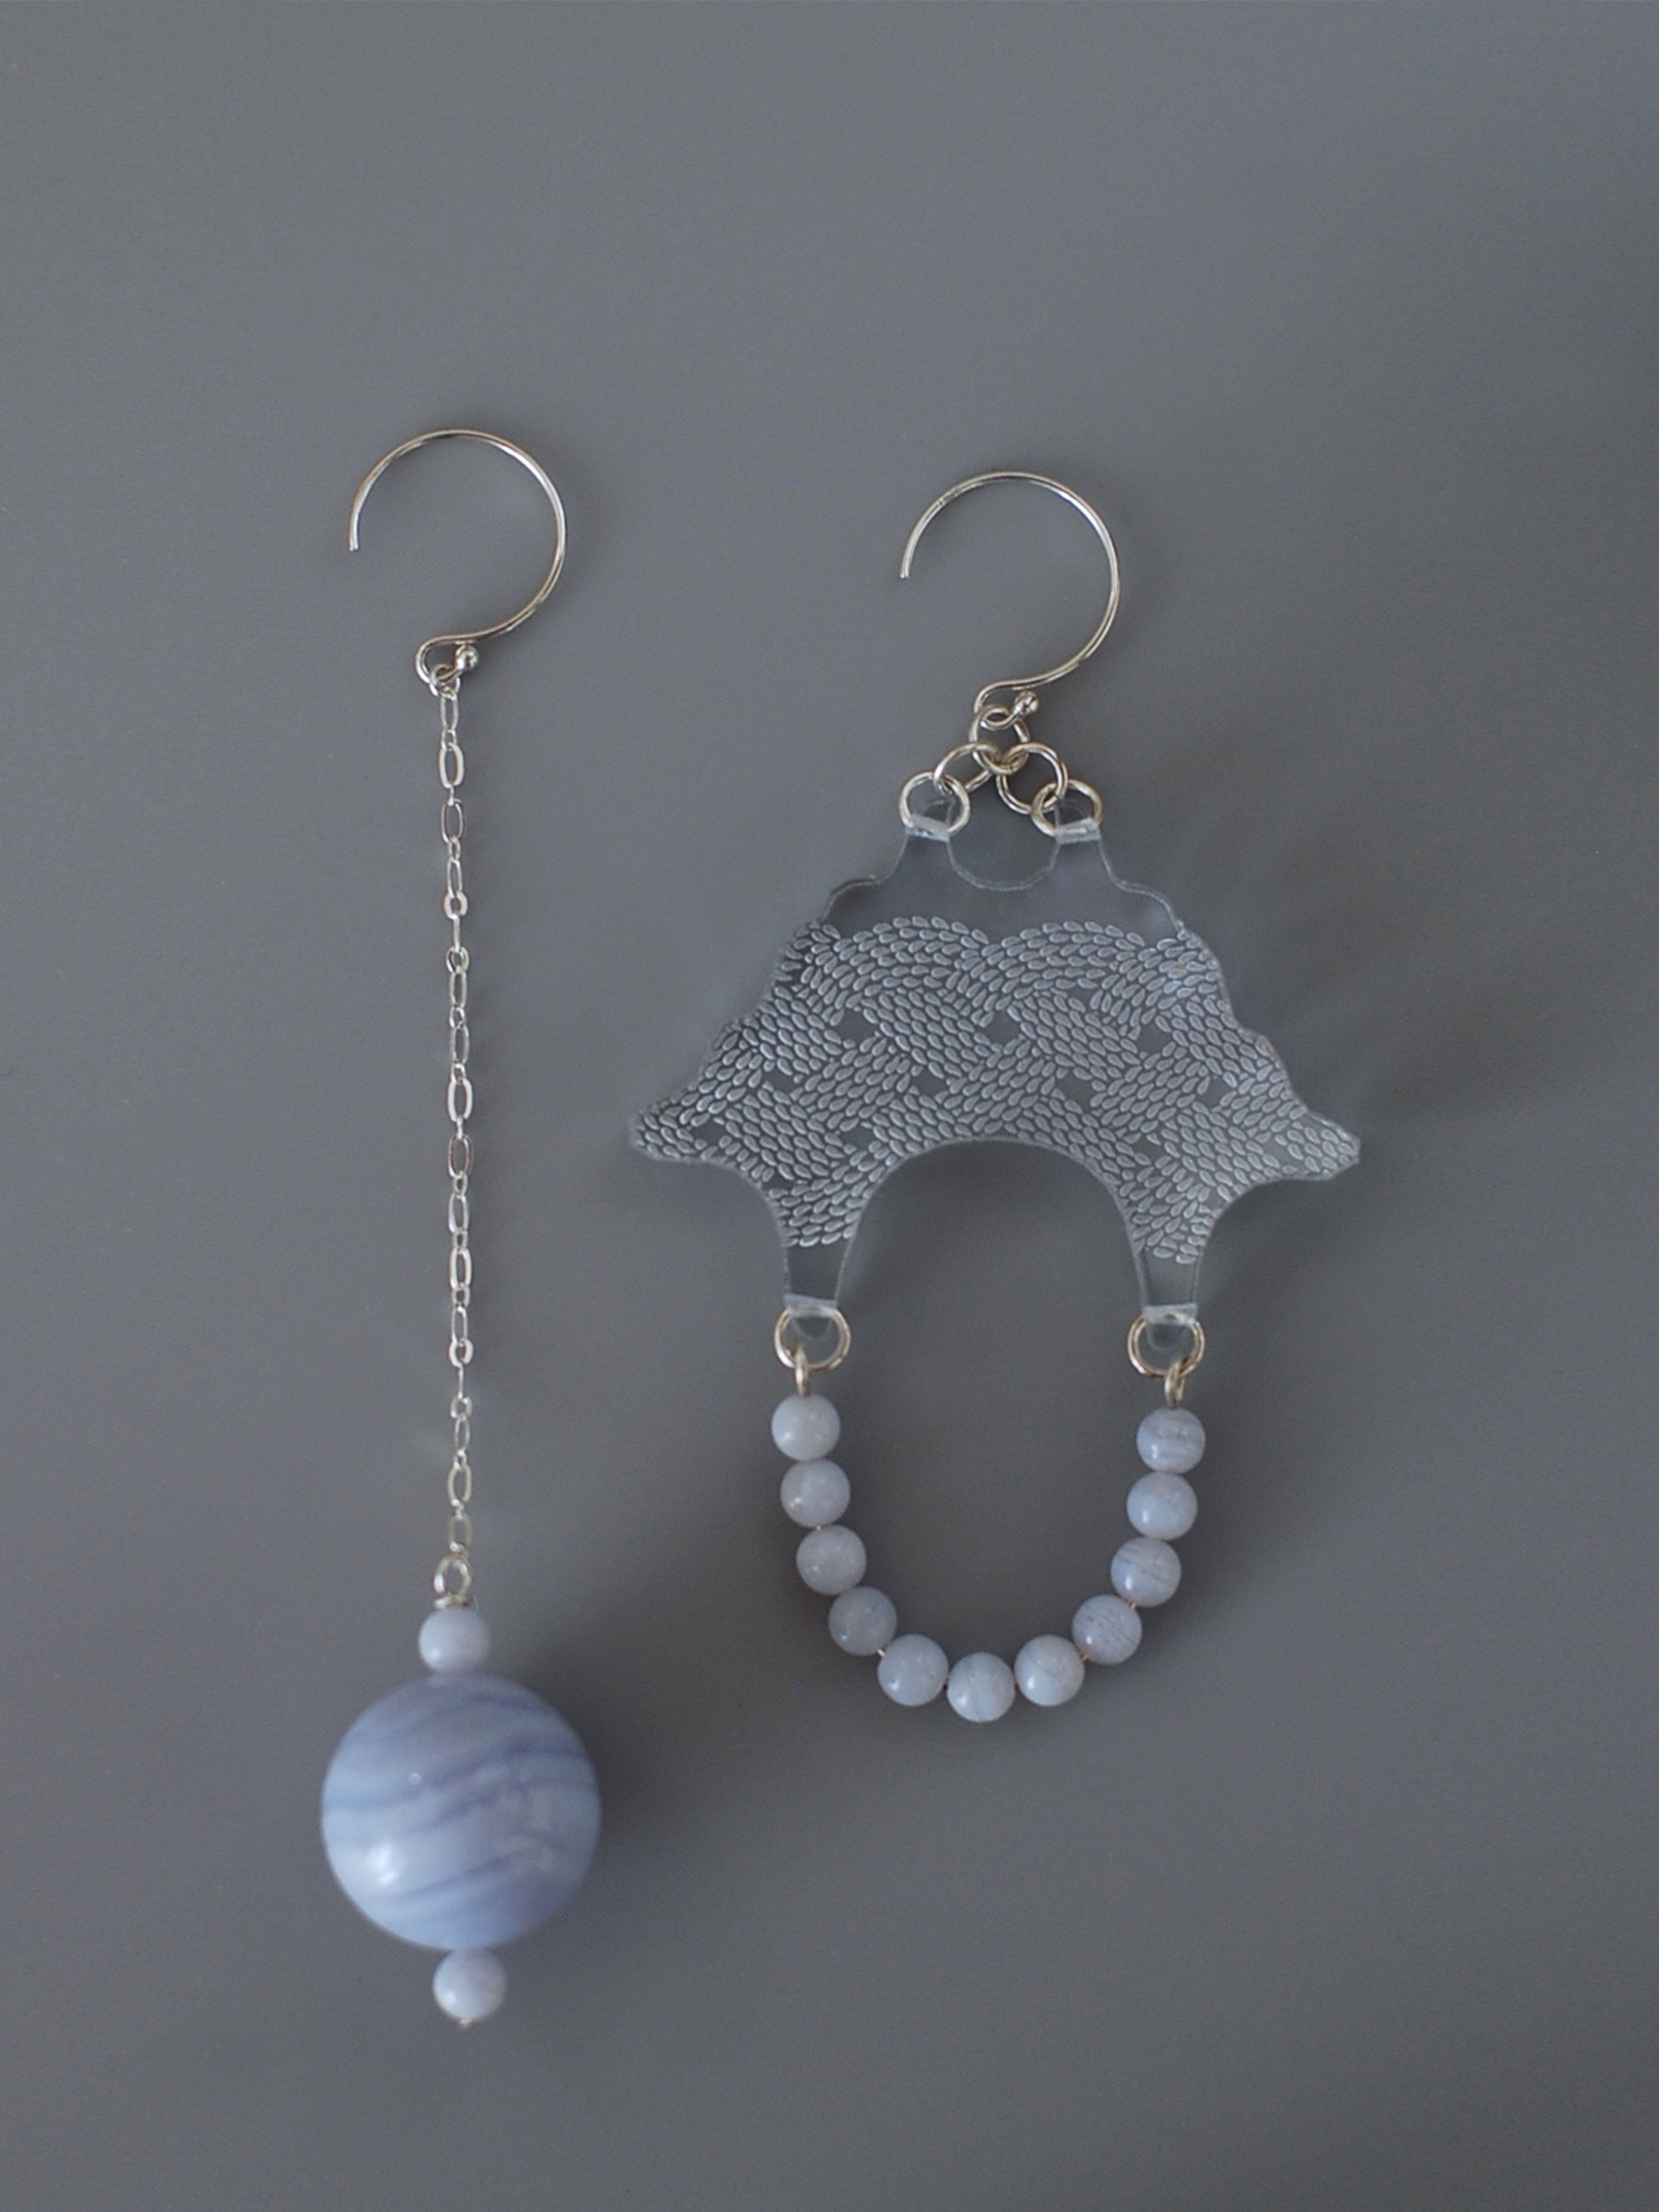 Melted Spin Pierce 04 (Blue lace agate)